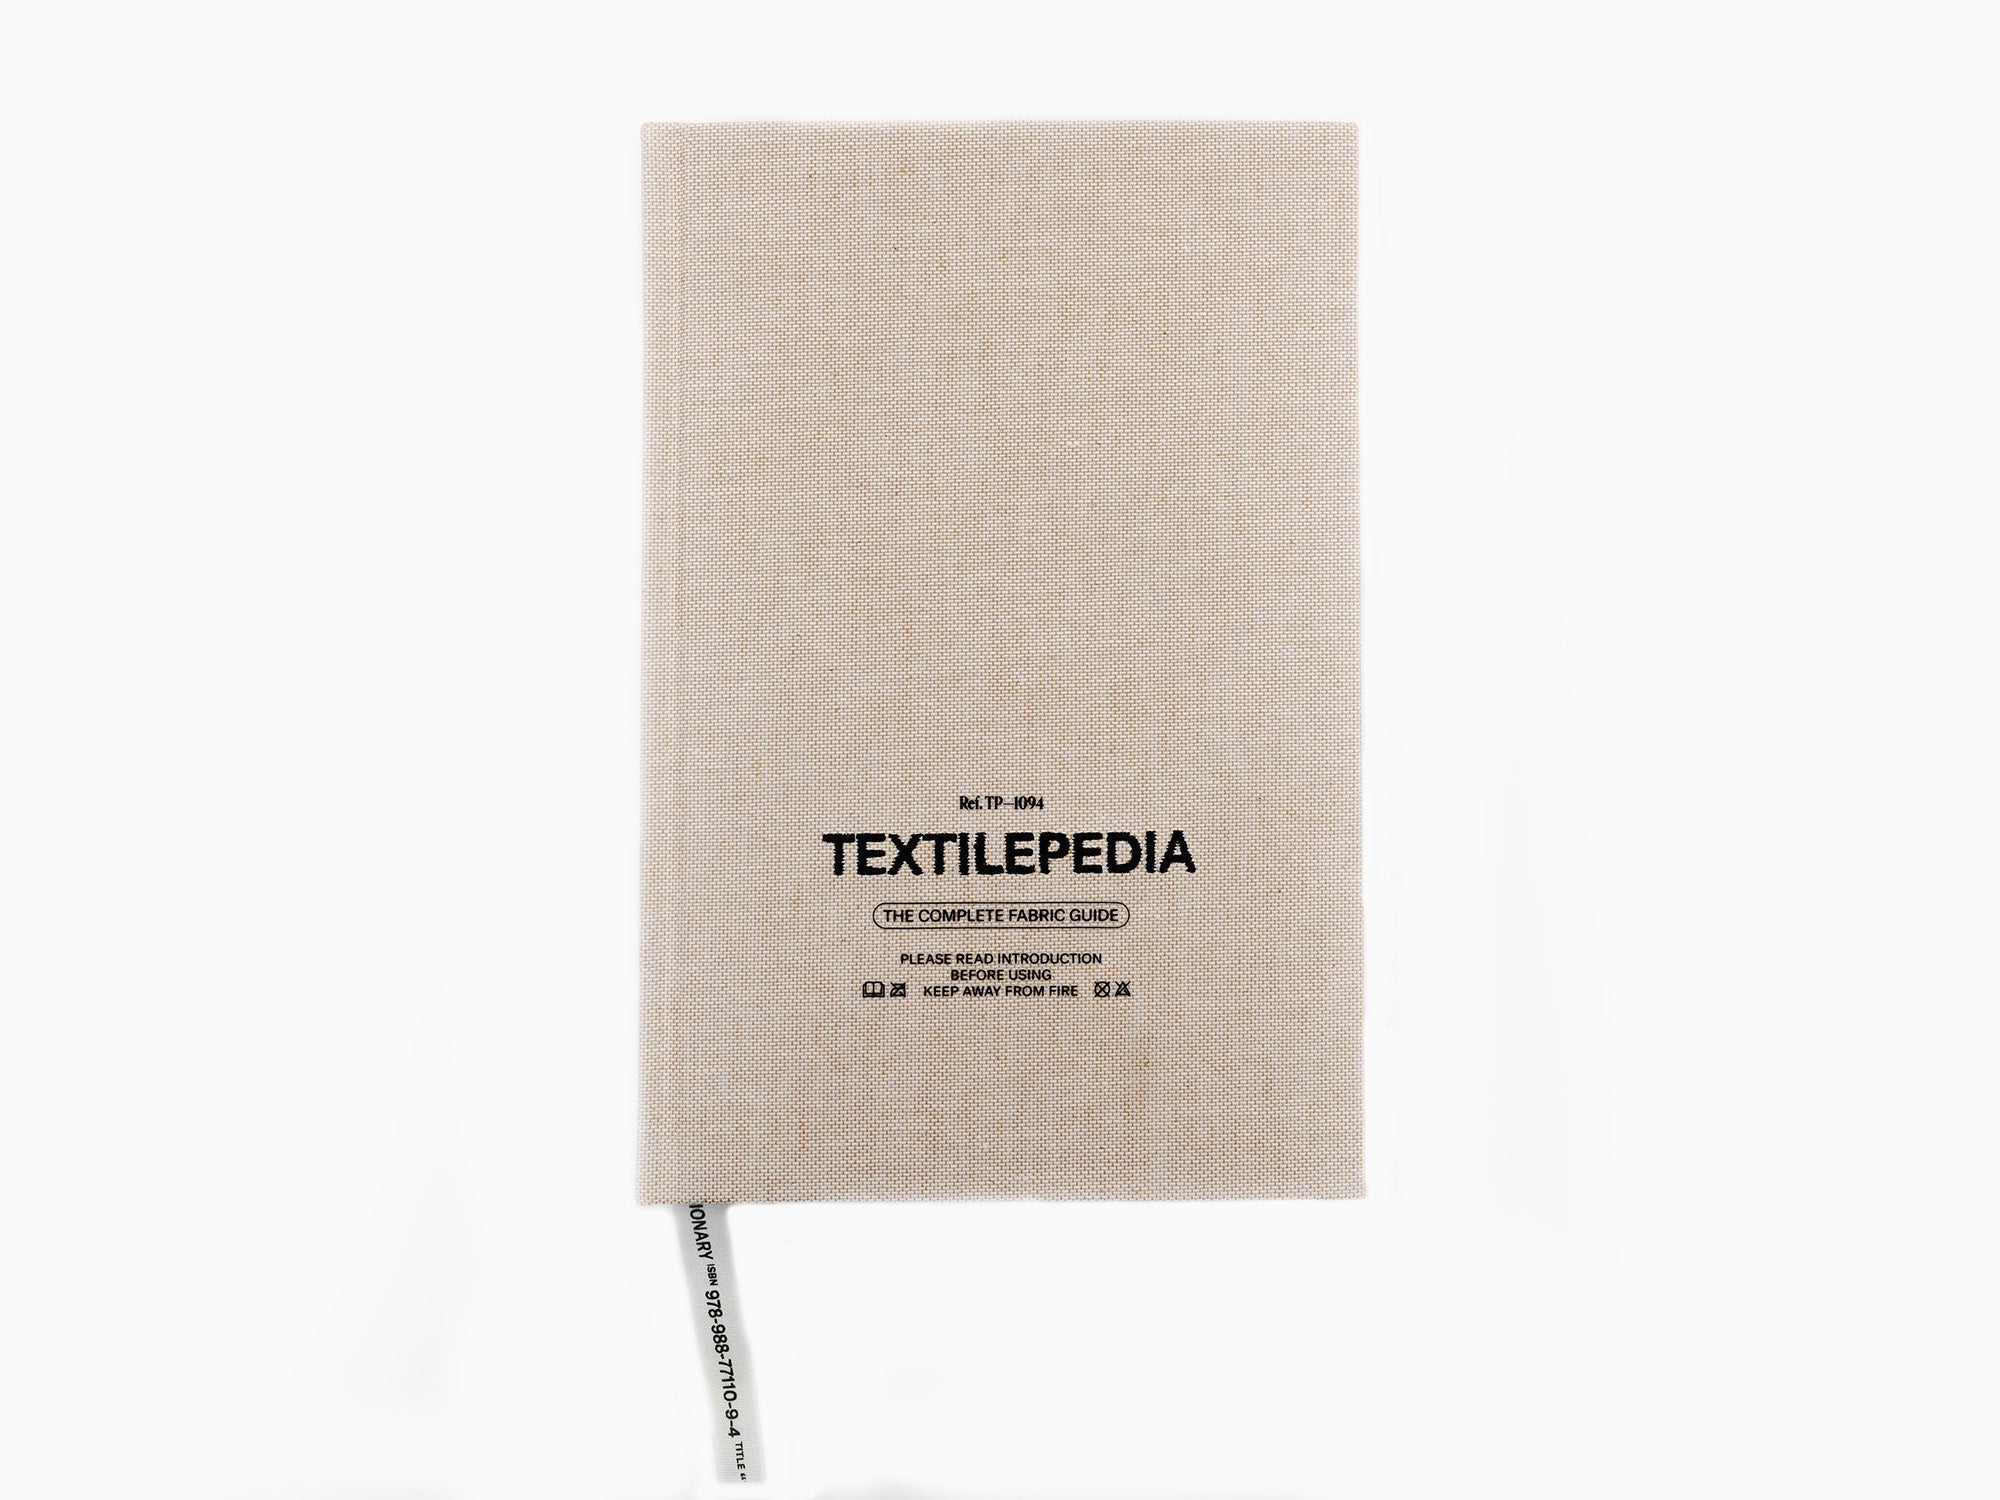 Textilepedia - The complete fabric guide